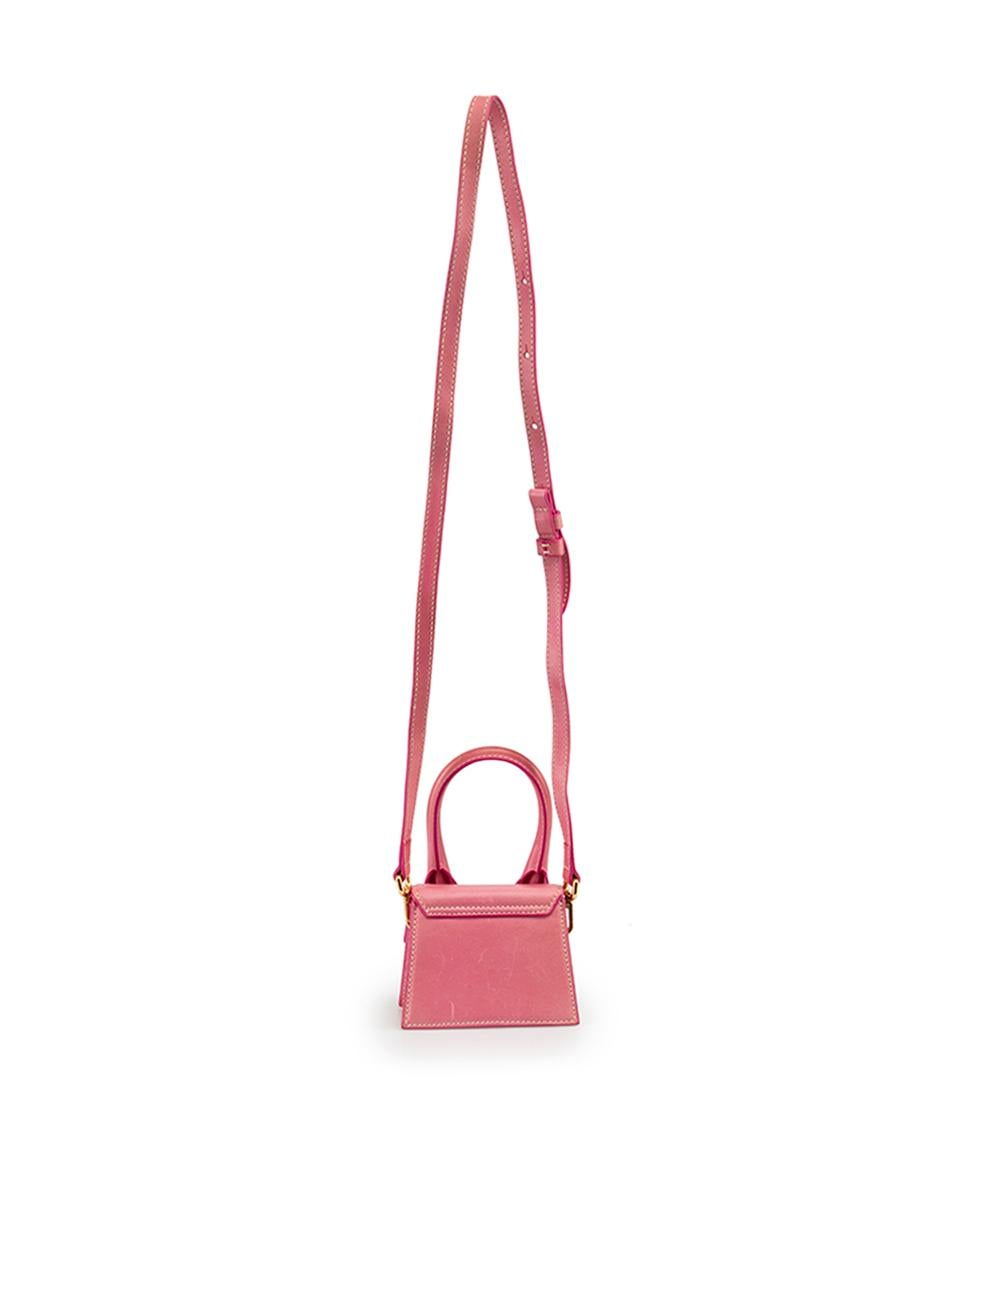 Jacquemus Pink Leather Le Chiquito Mini Bag In Excellent Condition In London, GB